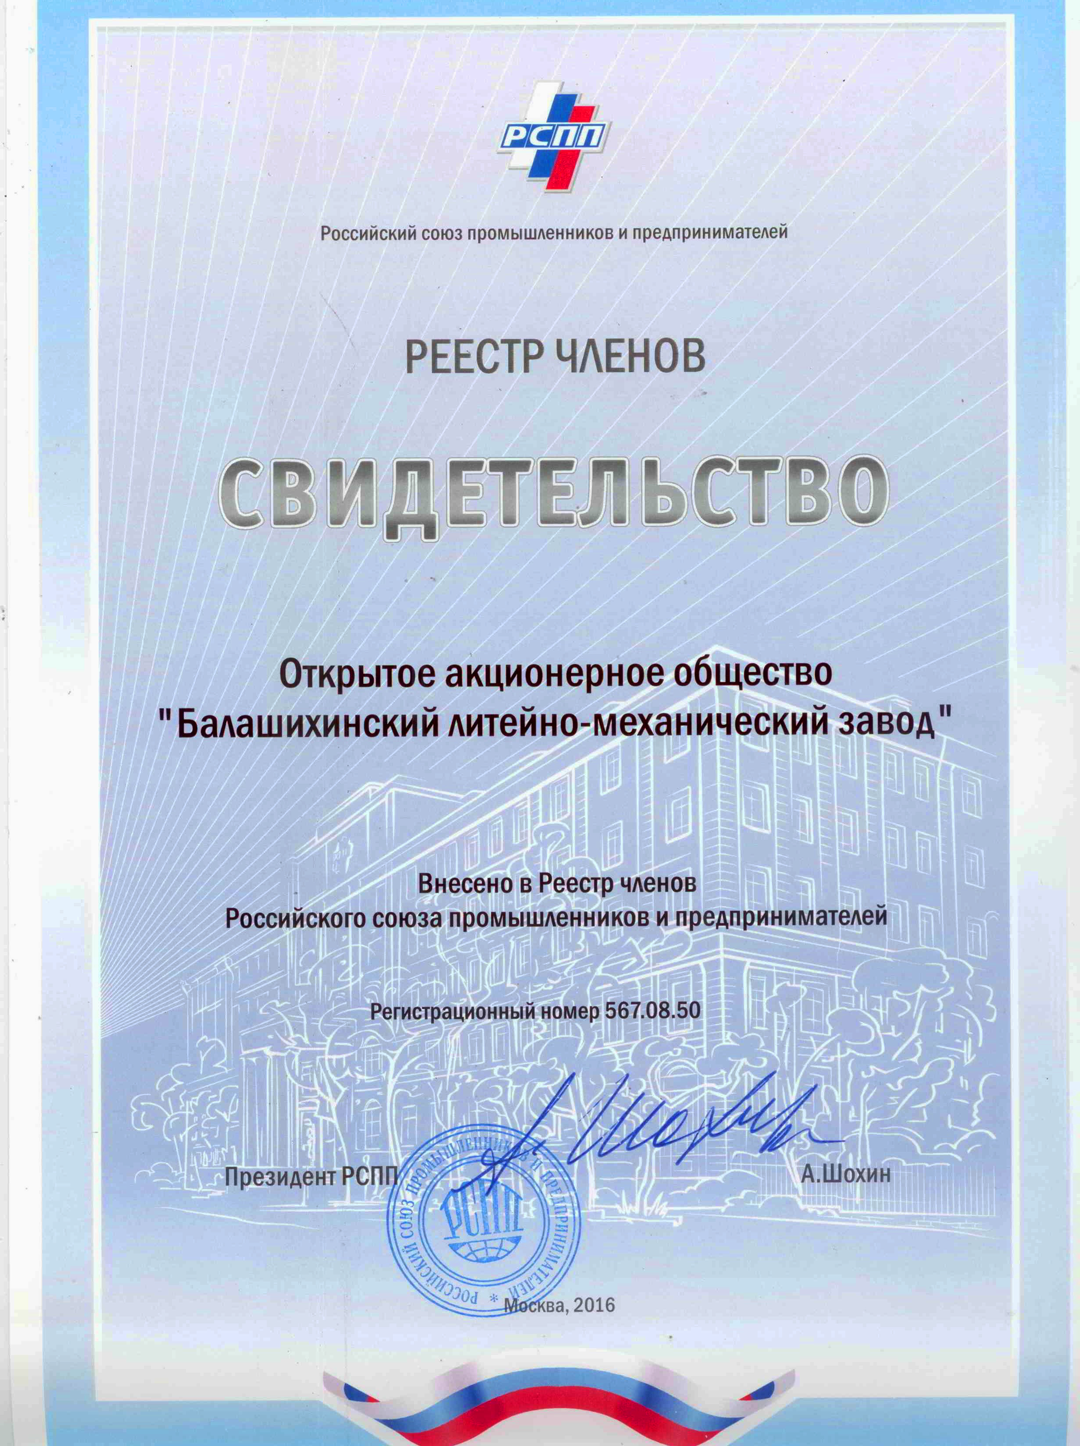 Certificate of membership of BLMZ, OAO the Russian Union of Industrialists and entrepreneurs (RSPP). Moscow 2016